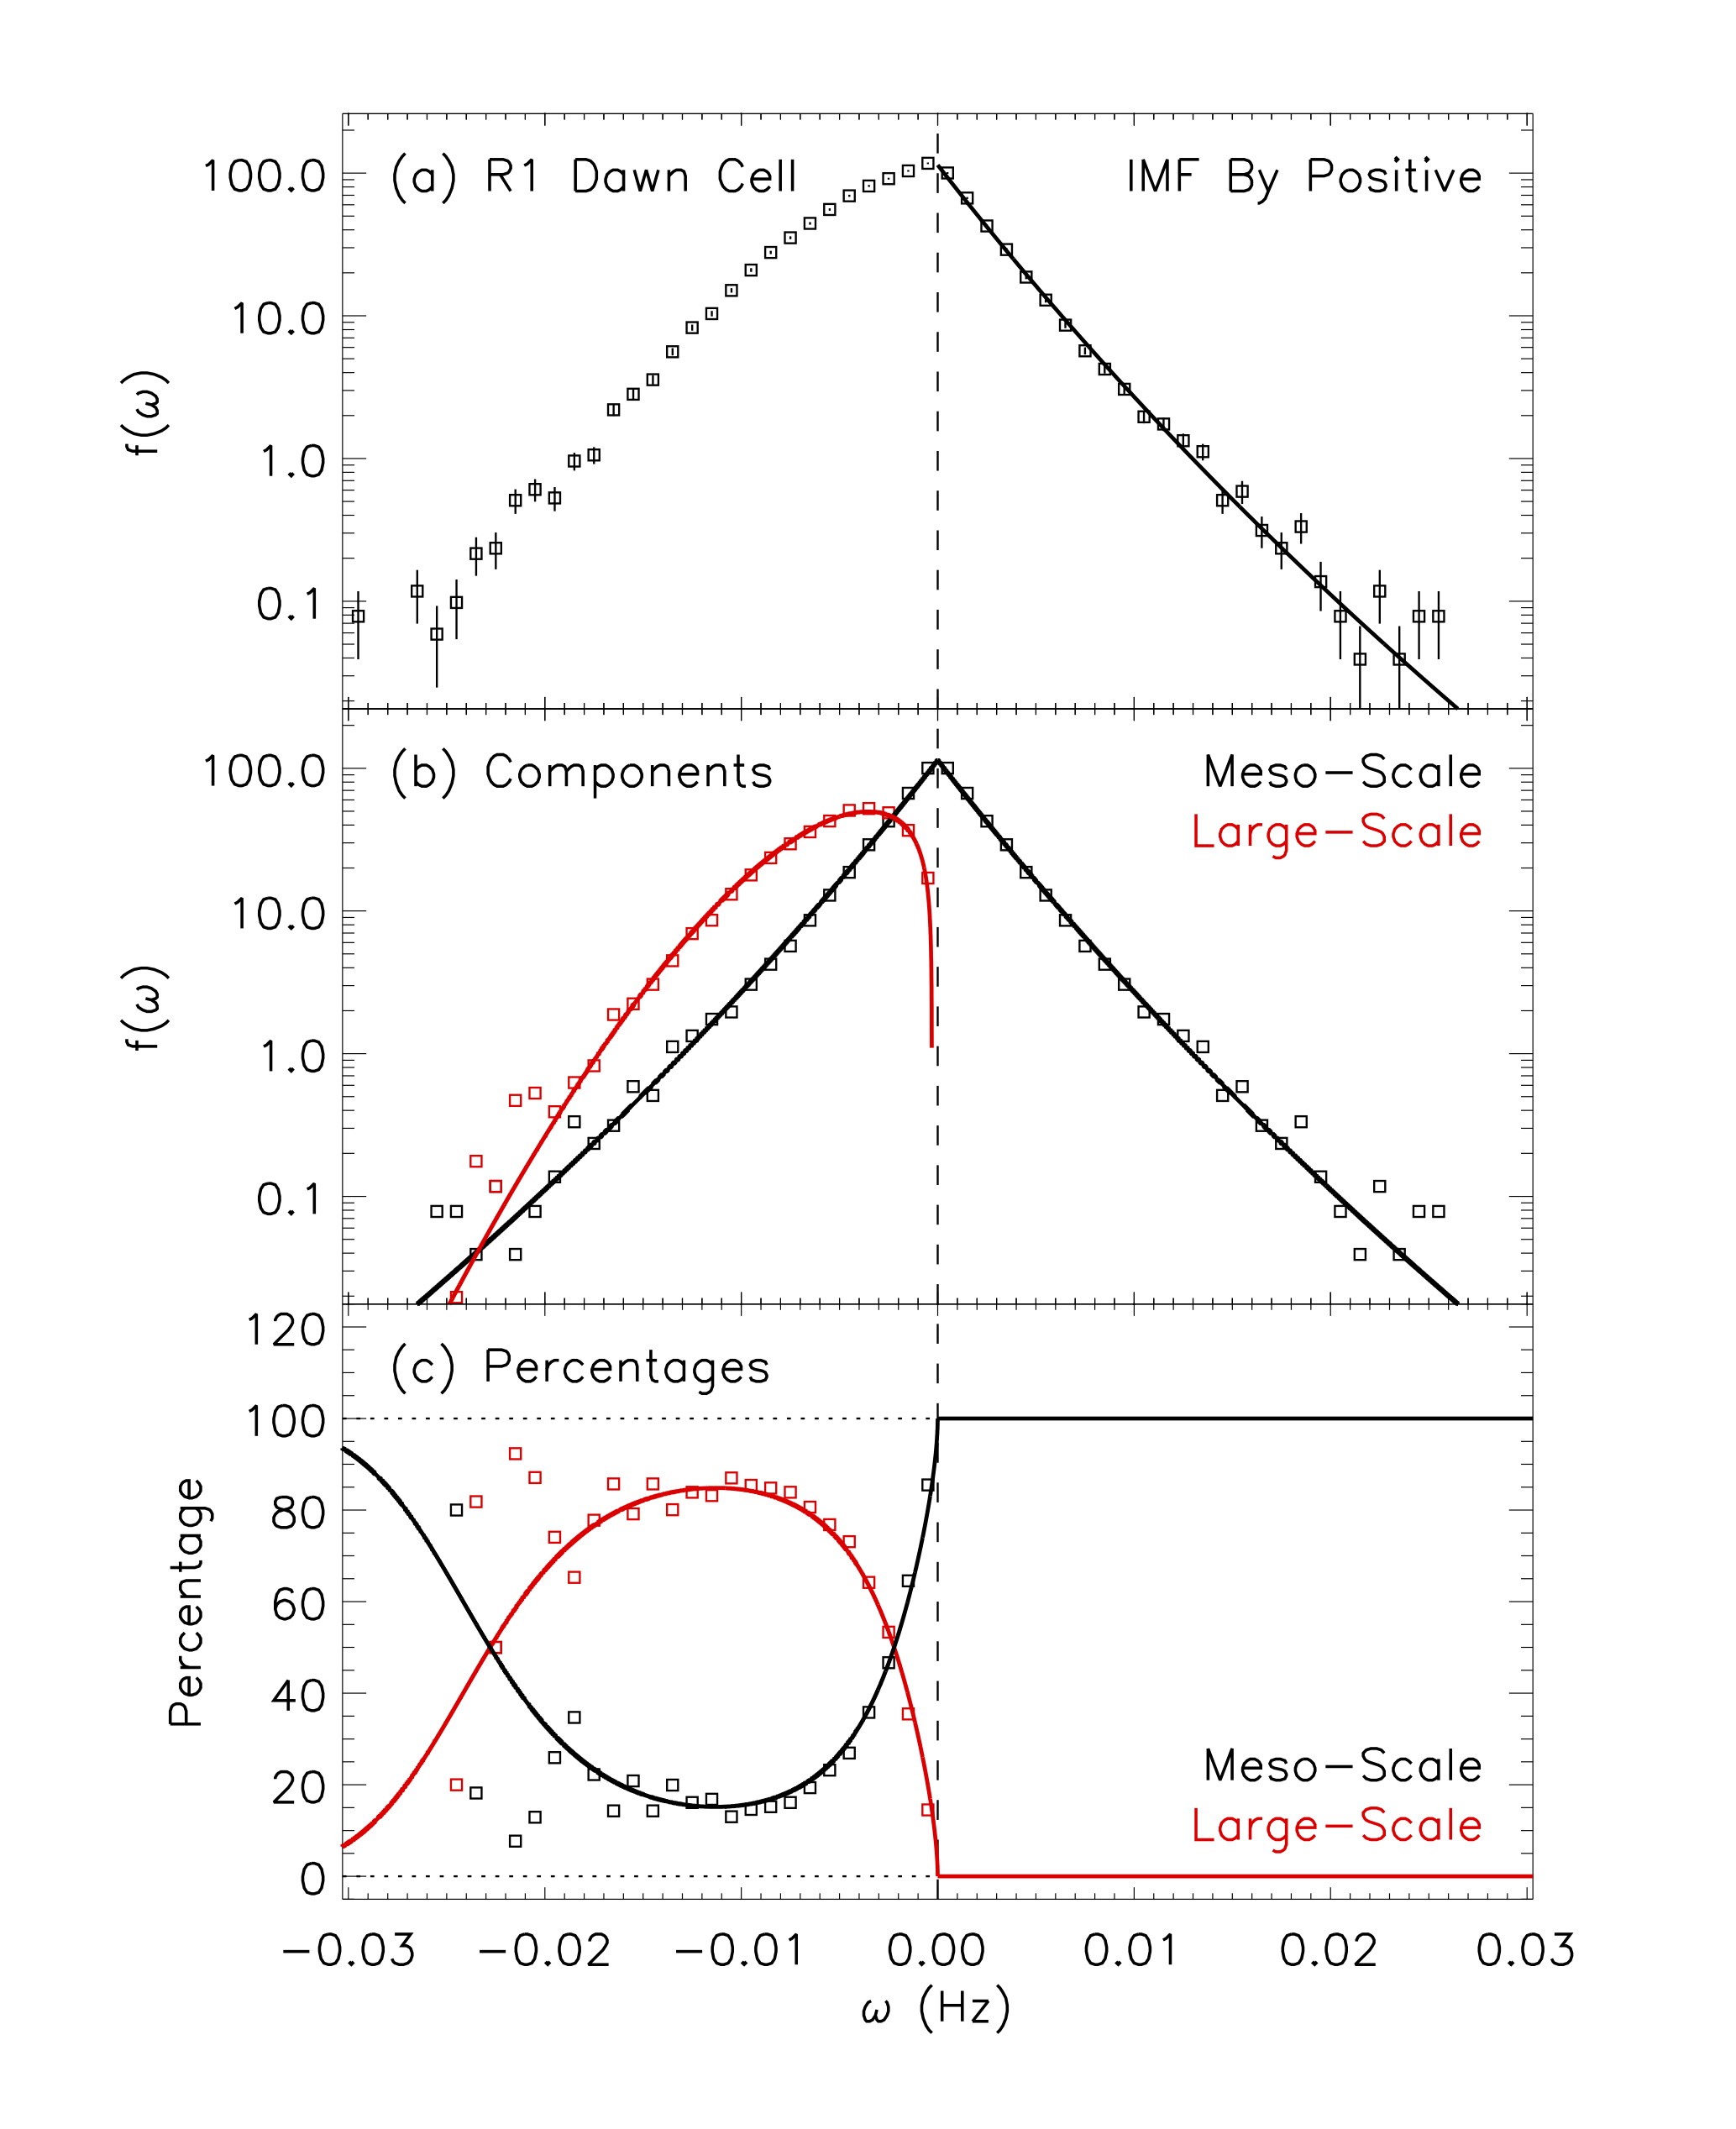 Figure with three vertical panels. This figure demonstrates the decomposition of the probability density function (PDF) of ionospheric vorticity into its large-scale and meso-scale components. The data is from 73-77 degrees AACGM latitude and 0800-1100 MLT (dawn convection cell), for IMF By positive conditions, for the years 2000-2006 inclusive. (a) PDF of all the measured vorticity measurements; (b) Separated components of the PDF with model fits; (c) Percentage contribution of each component for different values of vorticity.